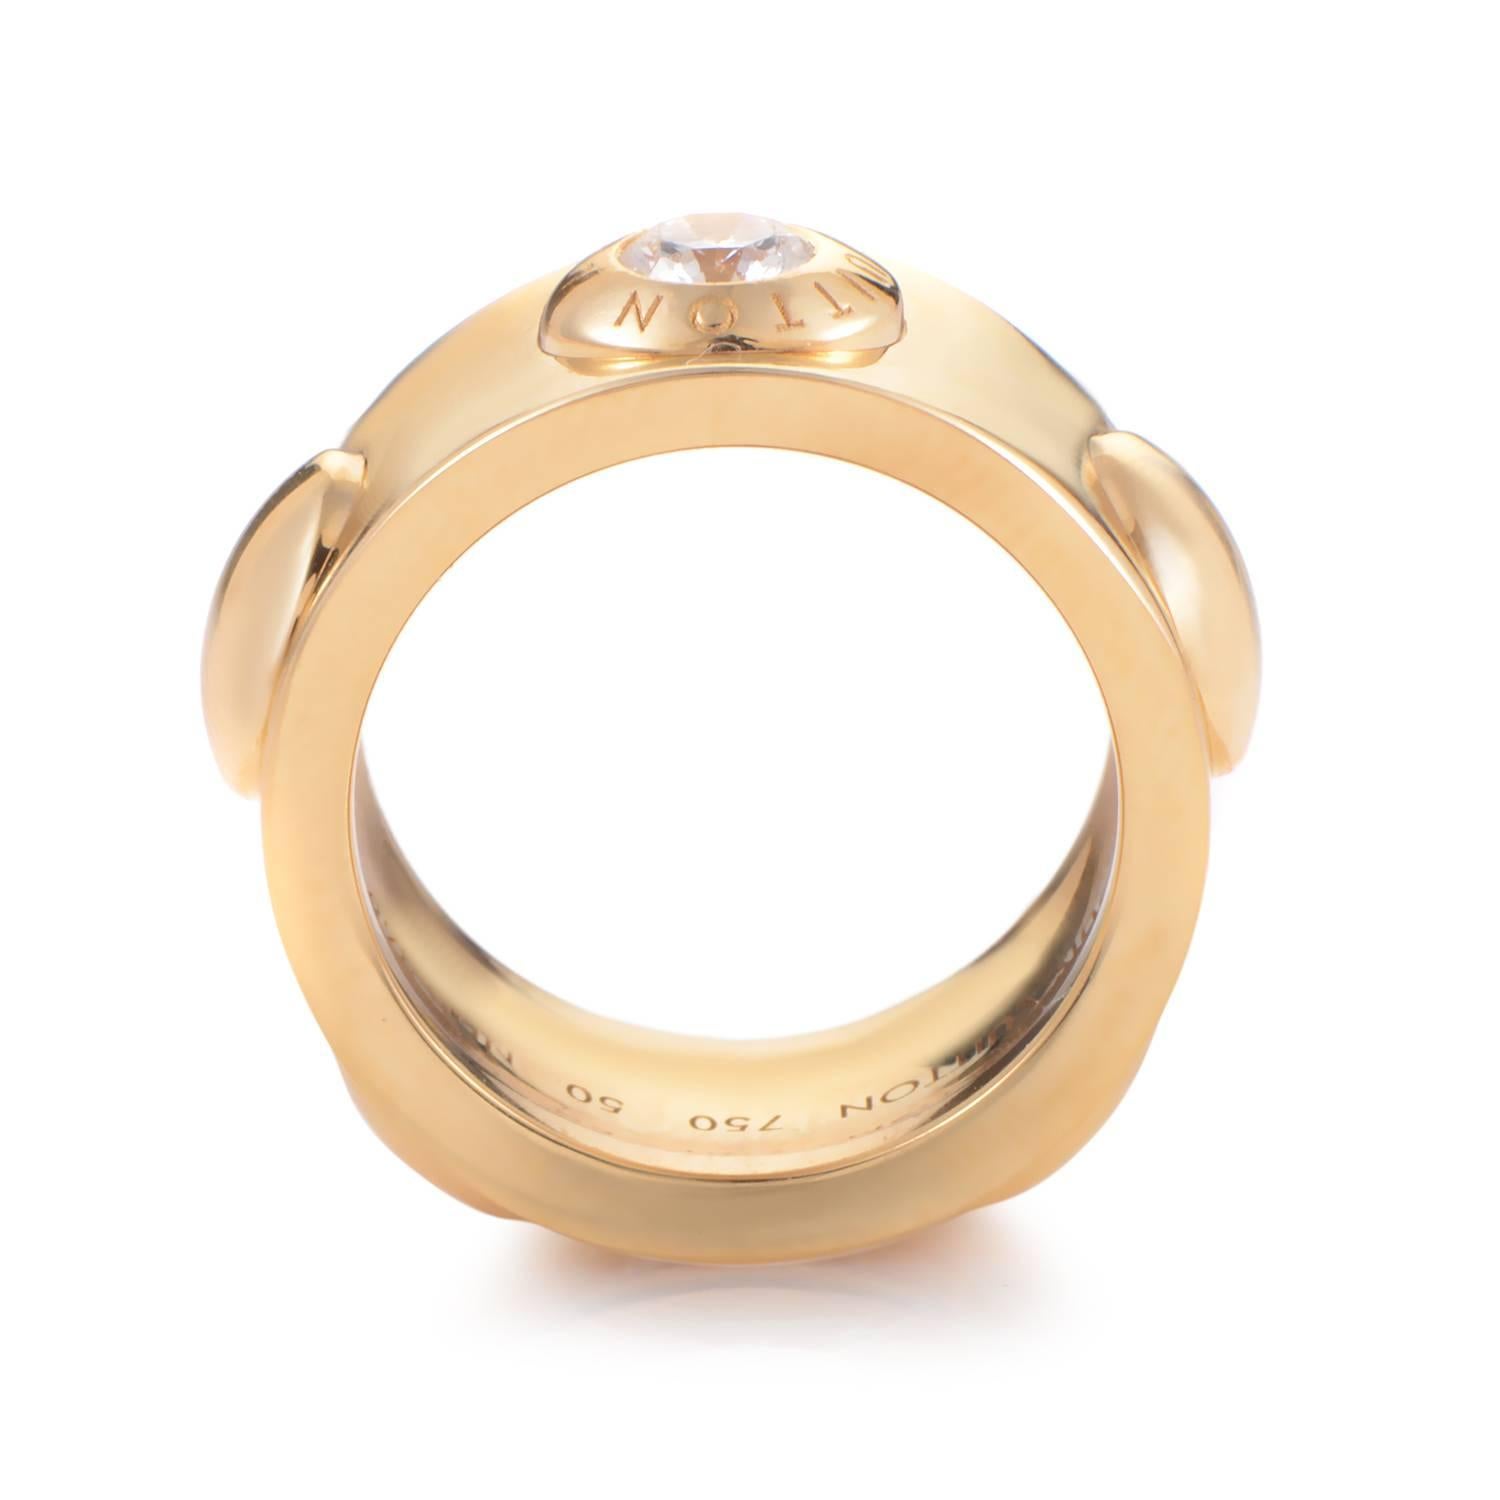 Louis Vuitton is a world wide icon of style, and the reason for this is evident in this bold 18K yellow gold ring. Domed gold punctuates the even shank with a stunning ~.40ct diamond that is encircled by the inscribed Louis Vuitton name providing an